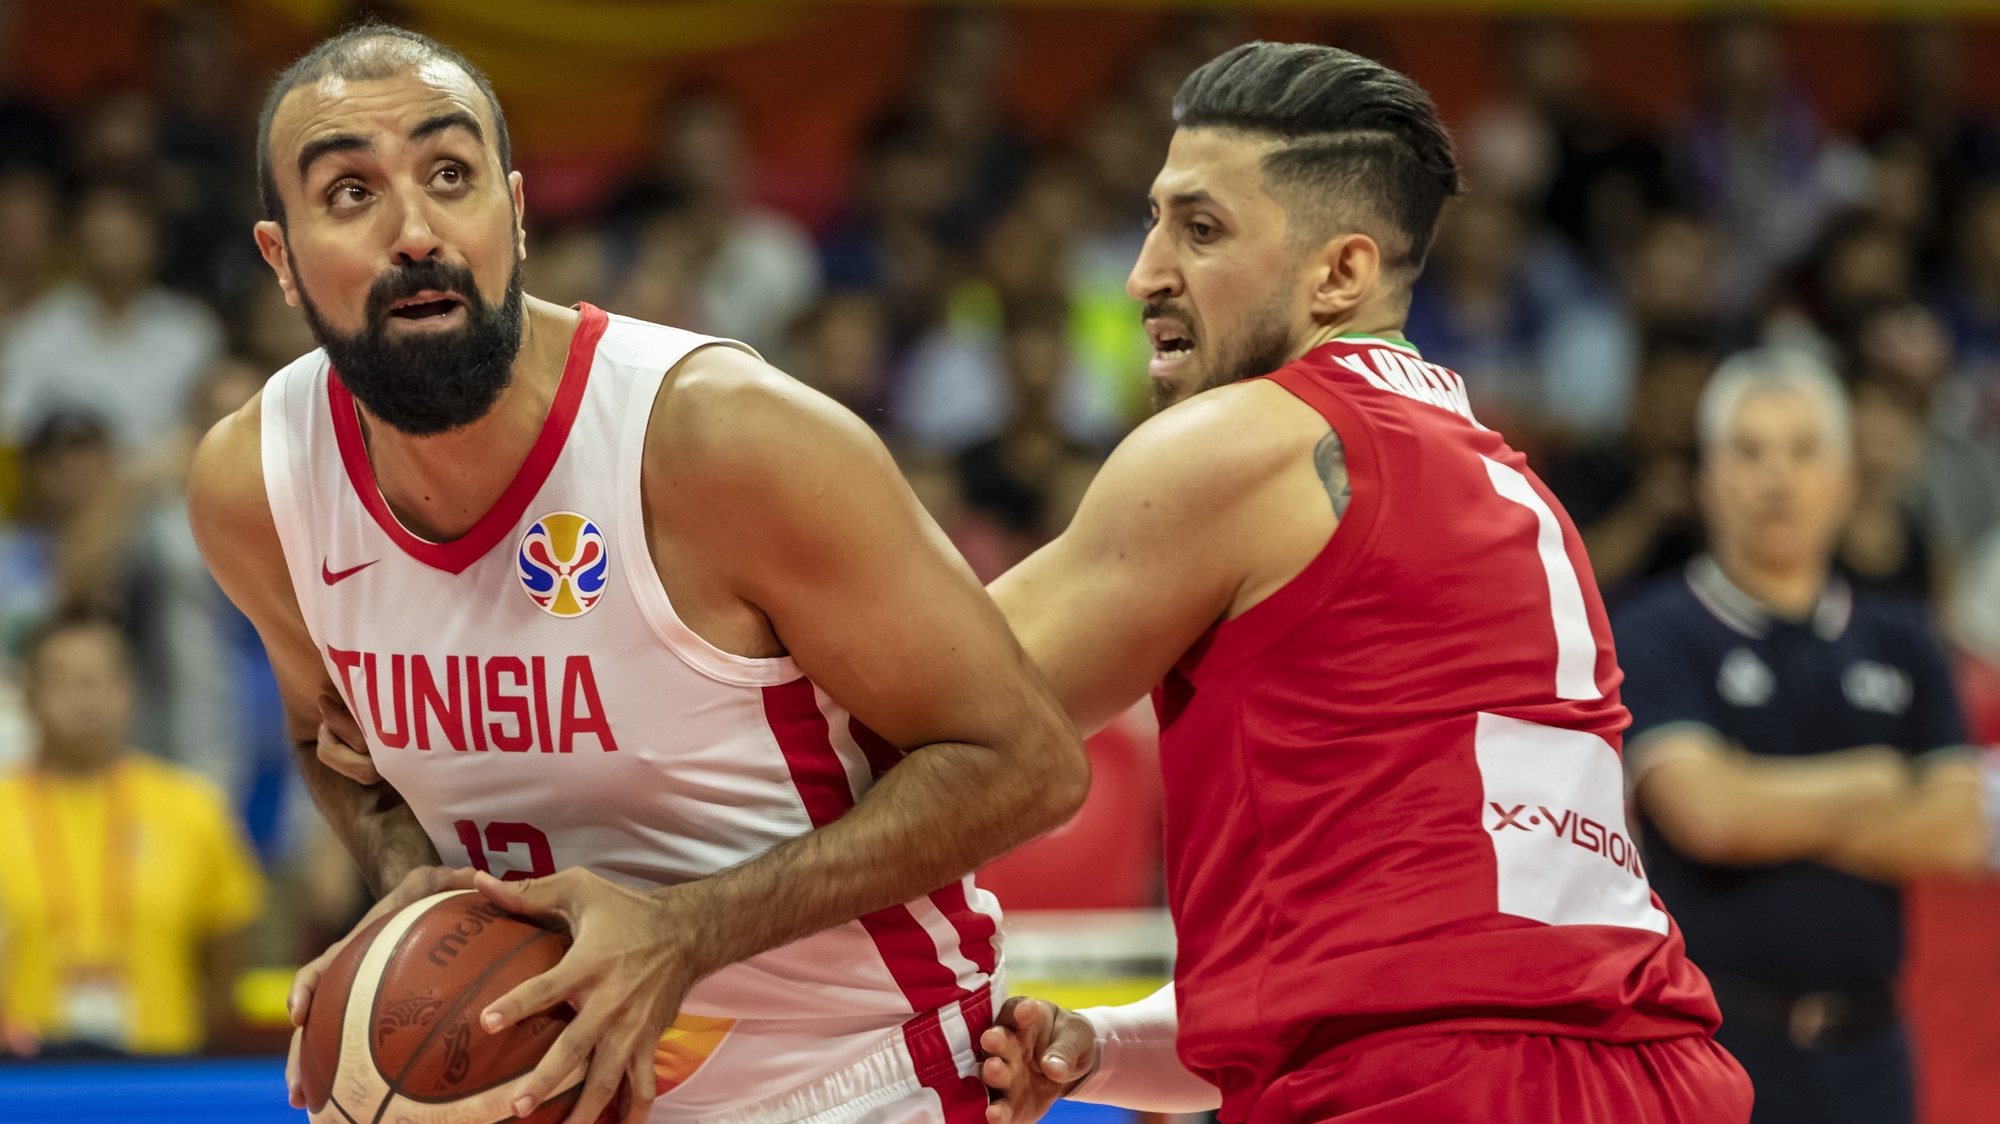 epa07812130 Makram Ben Romdhane of Tunisia (L) in action against Mohammad Hassanzadeh of Iran (R) during the FIBA Basketball World Cup 2019 match between Tunisia and Iran in Guangzhou, China, 02 September 2019.  EPA/ALEX PLAVEVSKI